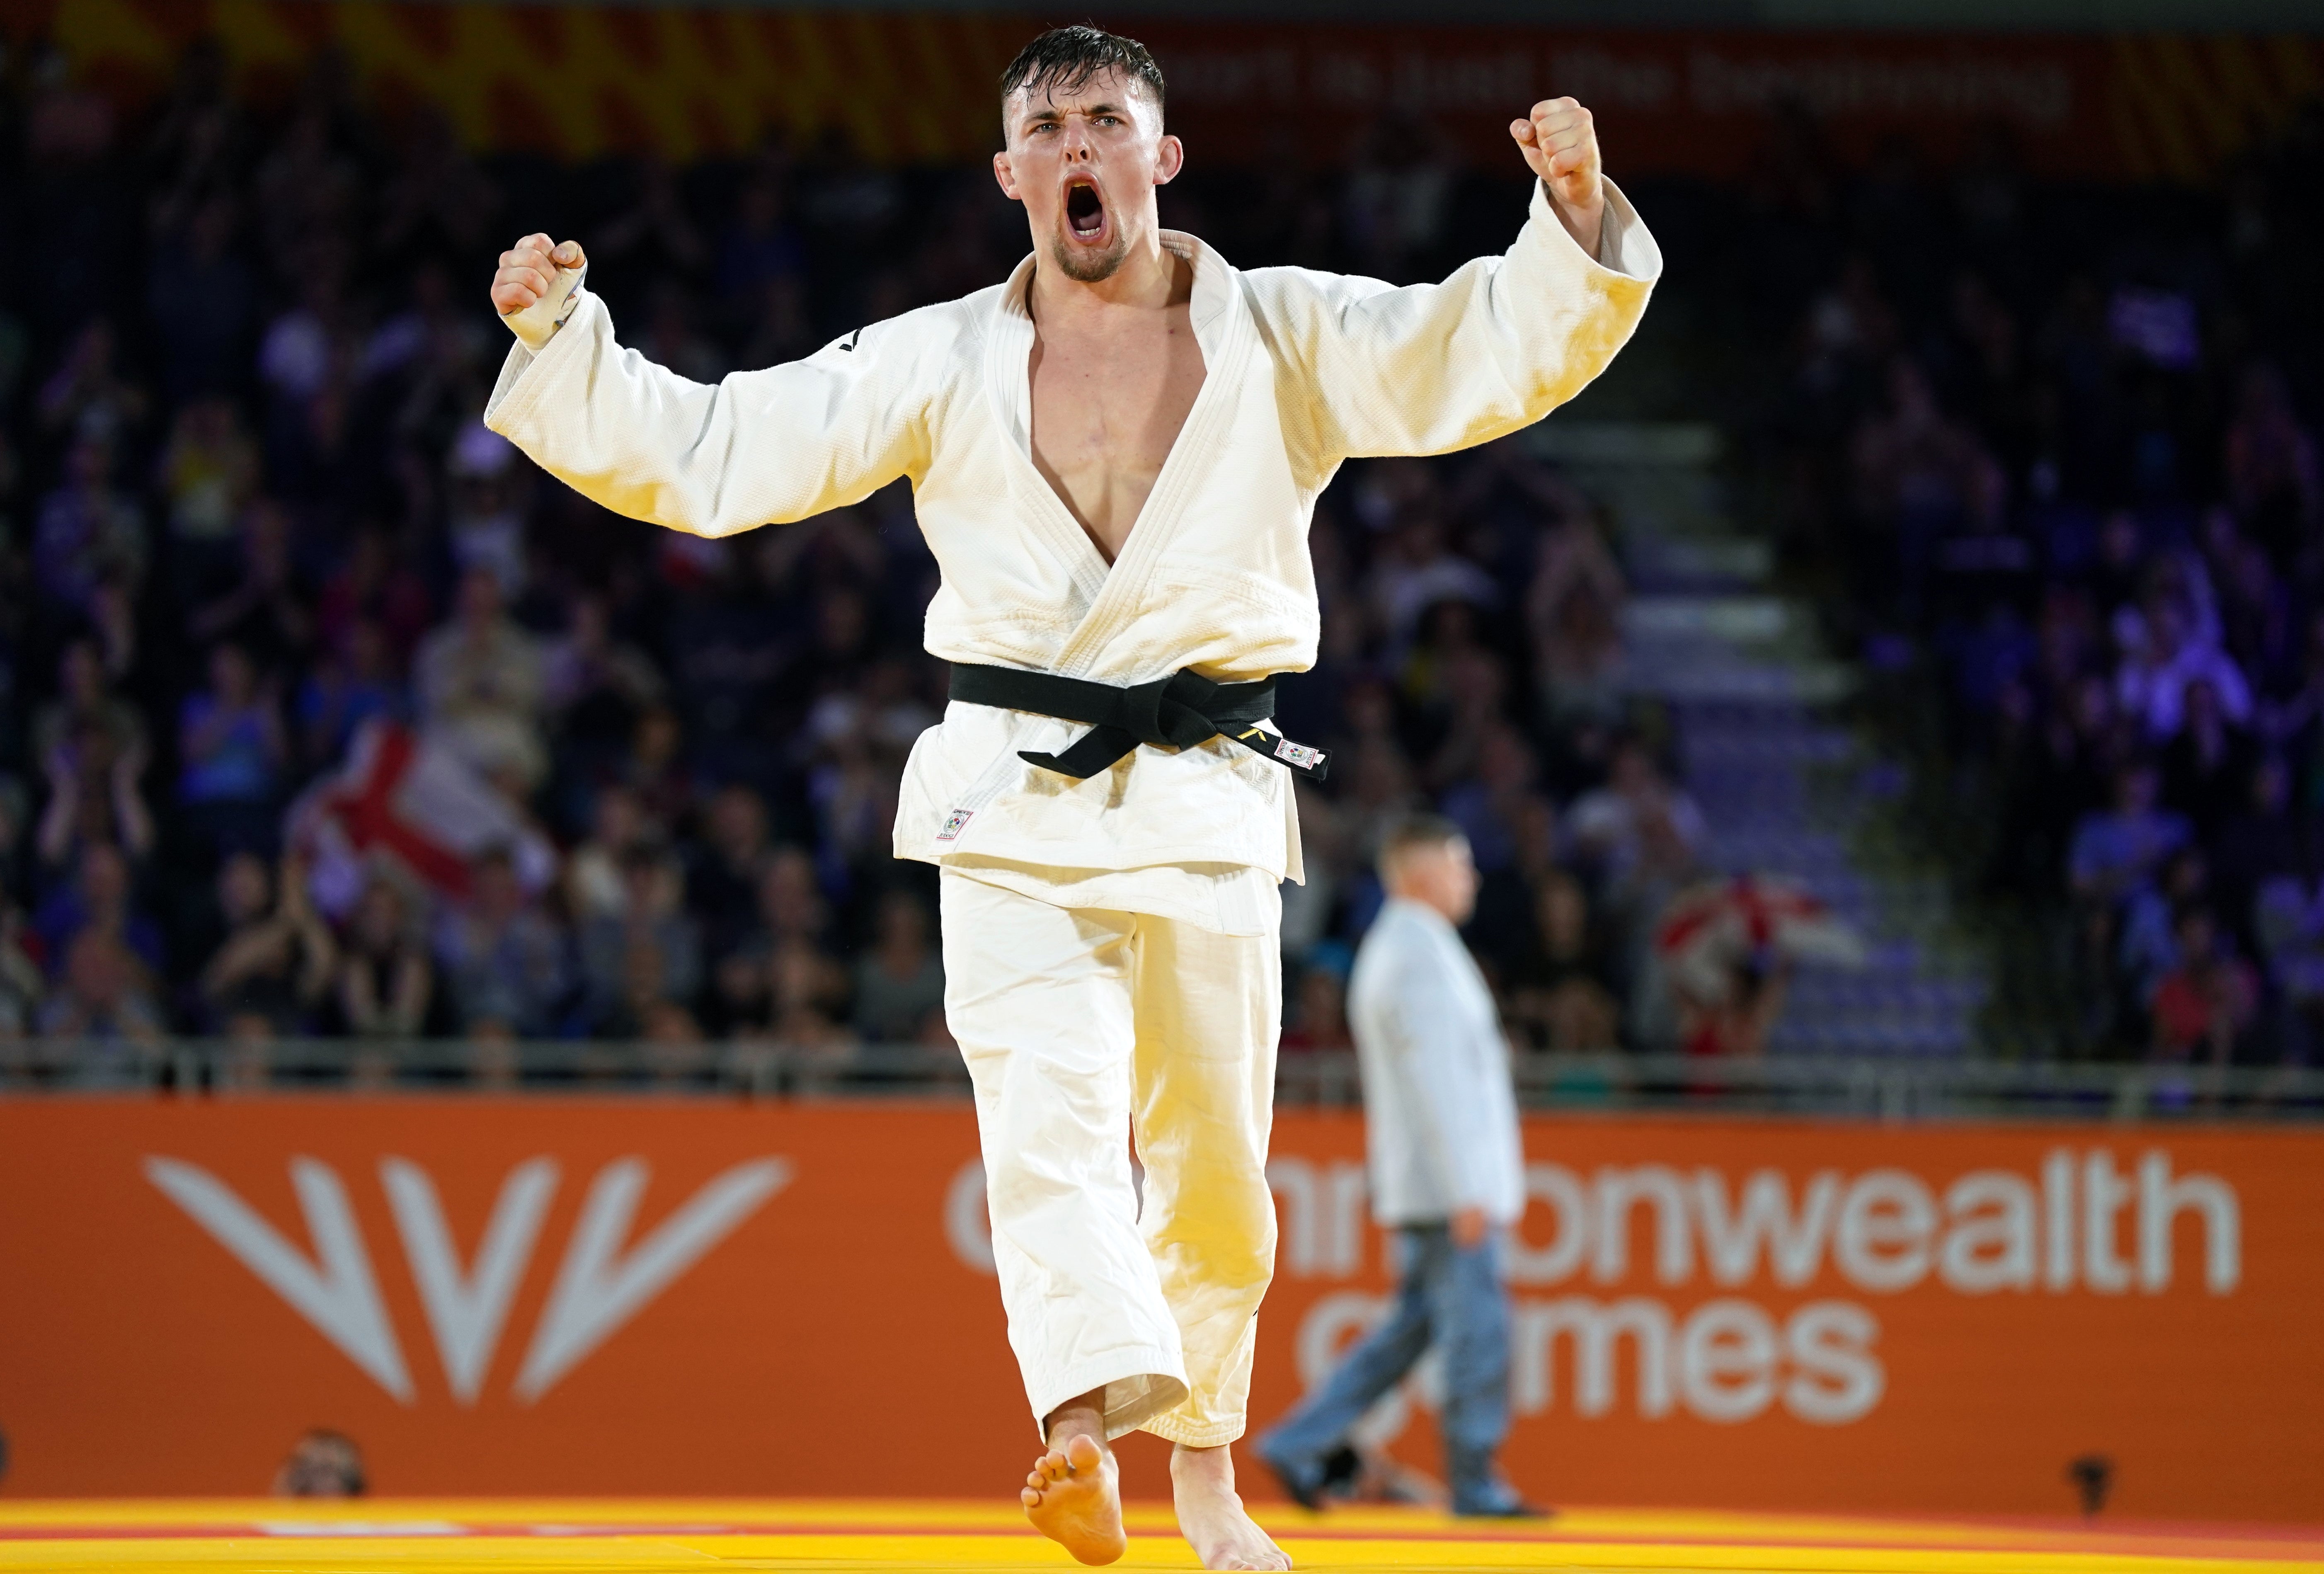 Lachlan Moorhead struck gold for England at the 2022 Commonwealth Games (Nick Potts/PA)